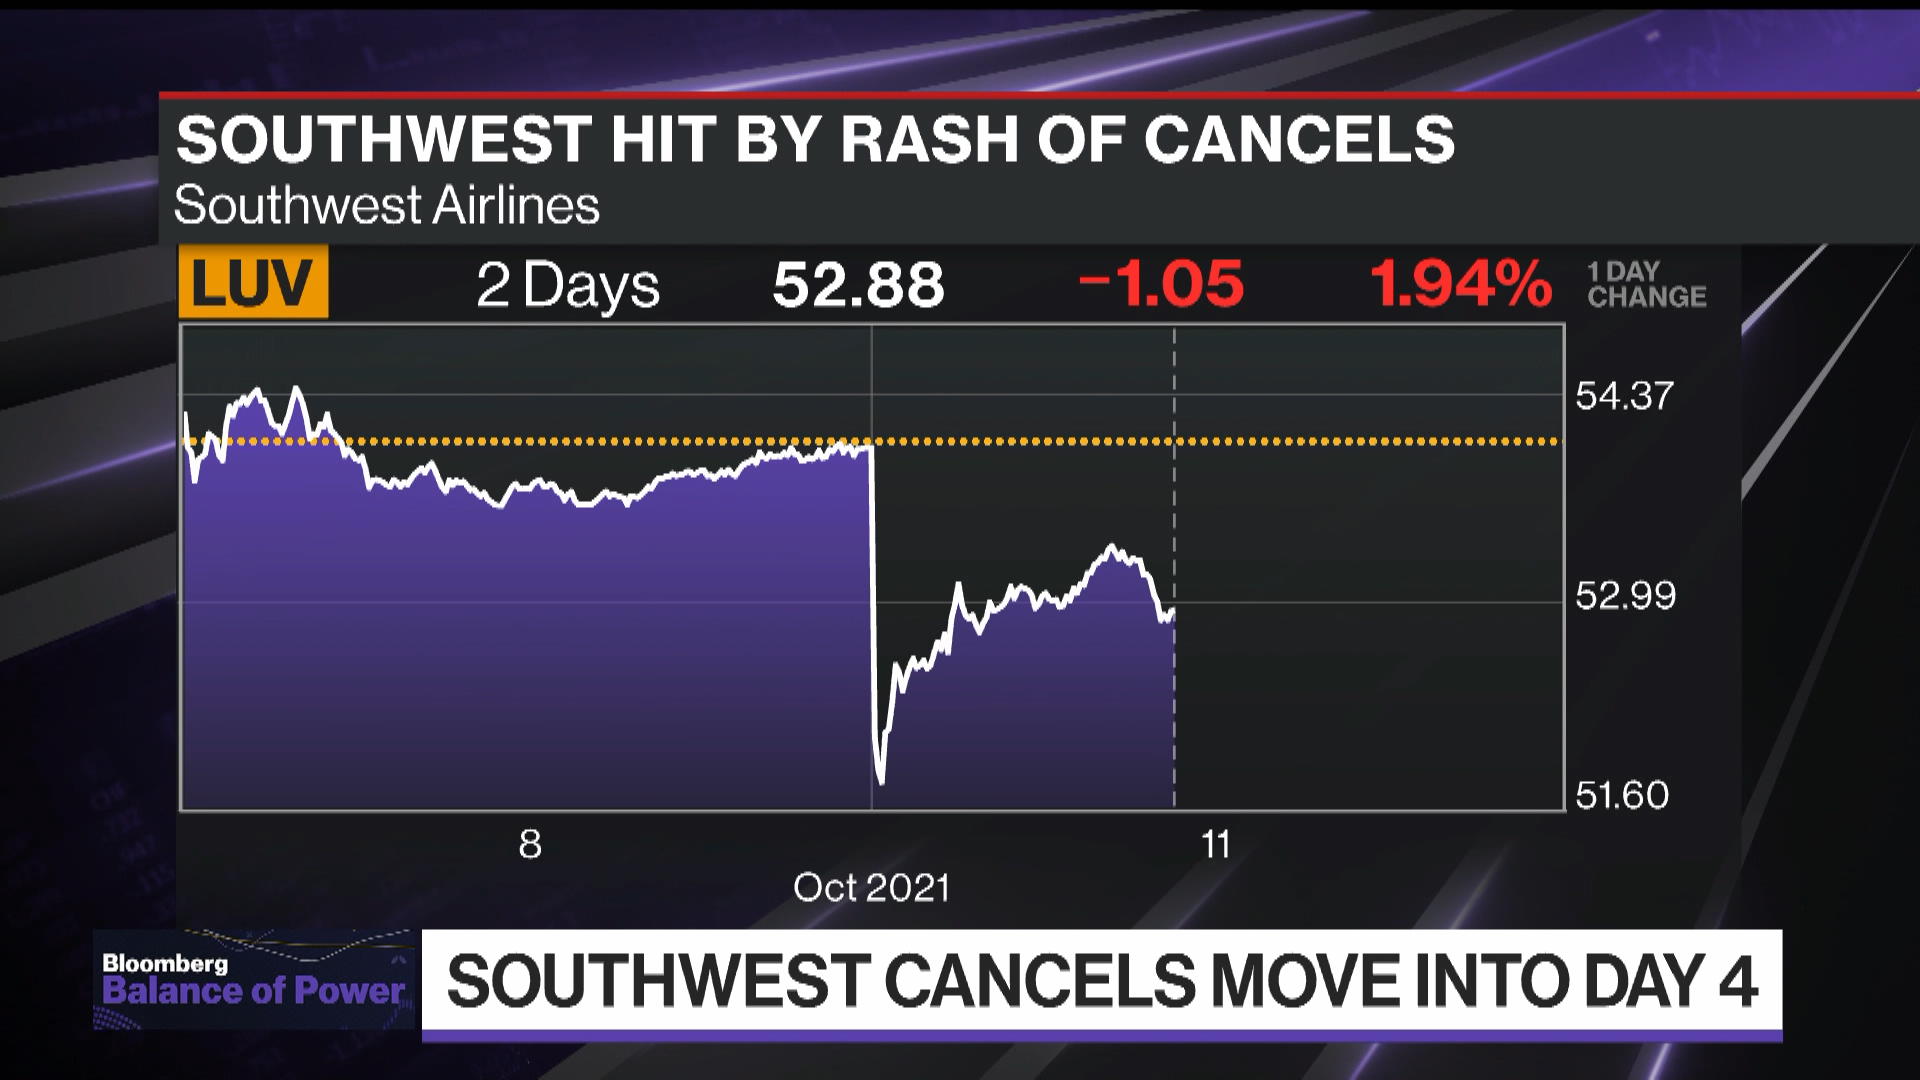 Southwest Air (LUV) Flight Cancellations Move Into Fourth Day With 10% Parked - Bloomberg